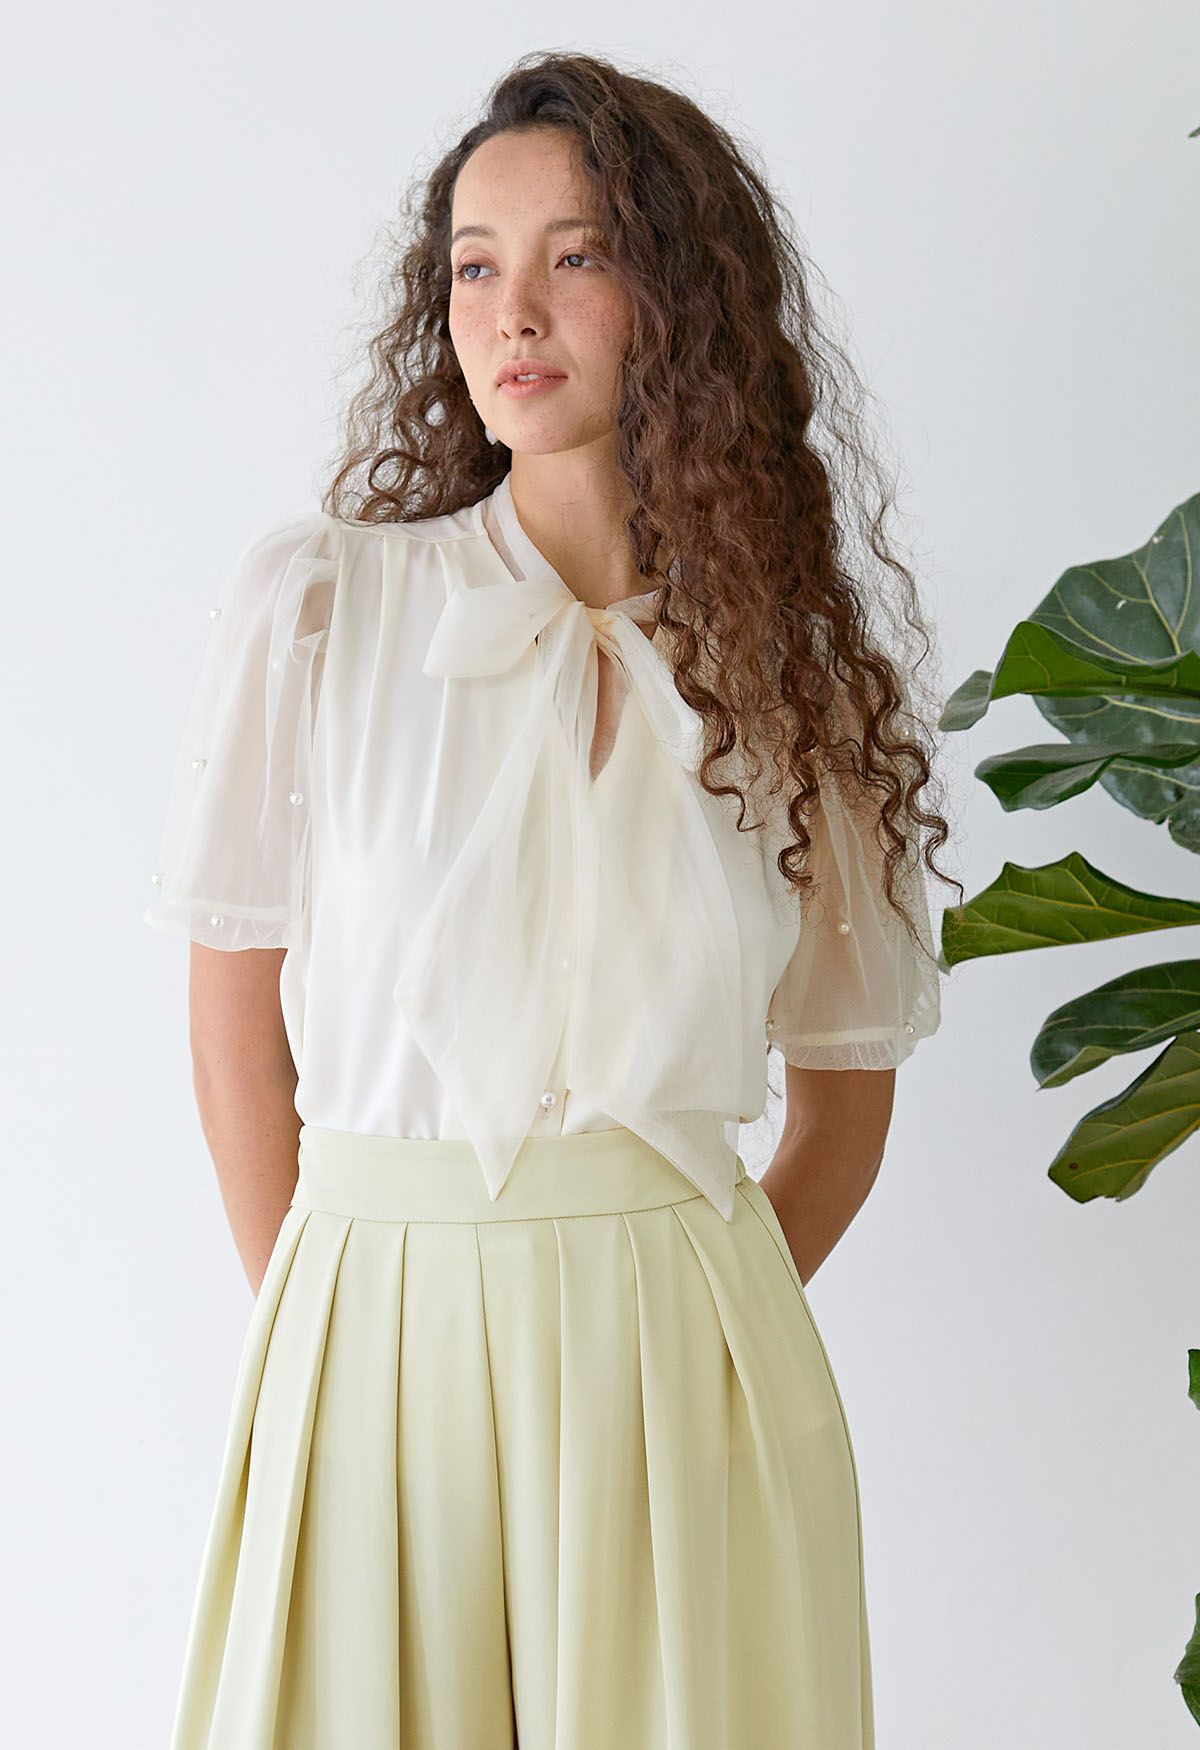 Bowknot Pearly Mesh Sleeve Spliced Satin Shirt in Cream